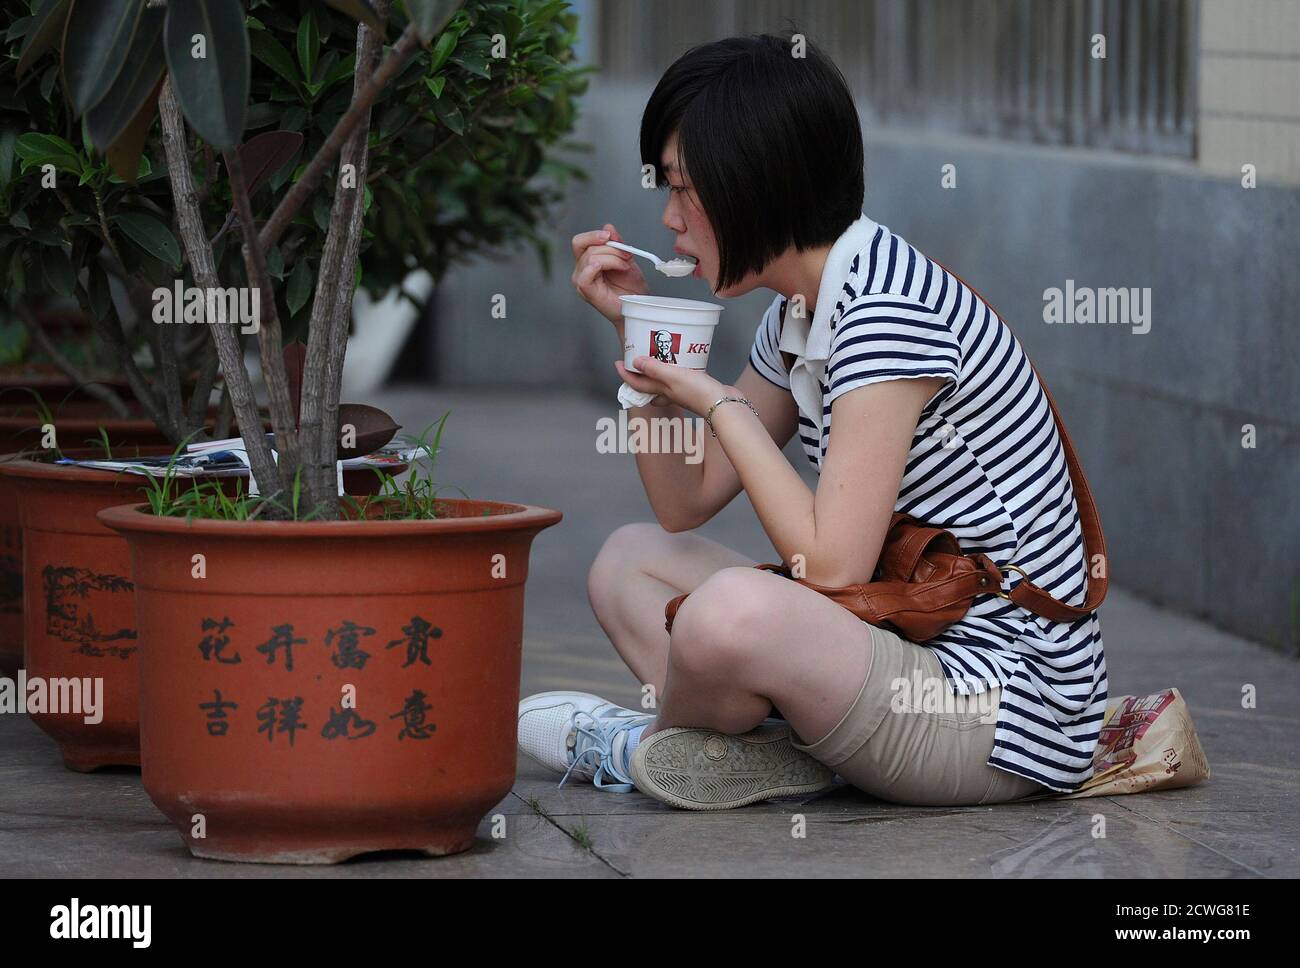 A student sits on the ground as she has a bowl of porridge from Kentucky Fried Chicken (KFC) for breakfast before the second day of National College Entrance Exams in Hefei, Anhui province June 8, 2011. About 9.33 million students make a start on China's national college entrance exams or 'gaokao' from June 7 to 8, a fiercely competitive test that is seen as make-or-break for getting ahead. The Chinese characters on the flowerpot read 'Fortune comes with blooming flowers, good luck and happiness as one wishes'.  REUTERS/Stringer (CHINA - Tags: EDUCATION FOOD ODDLY) Stock Photo